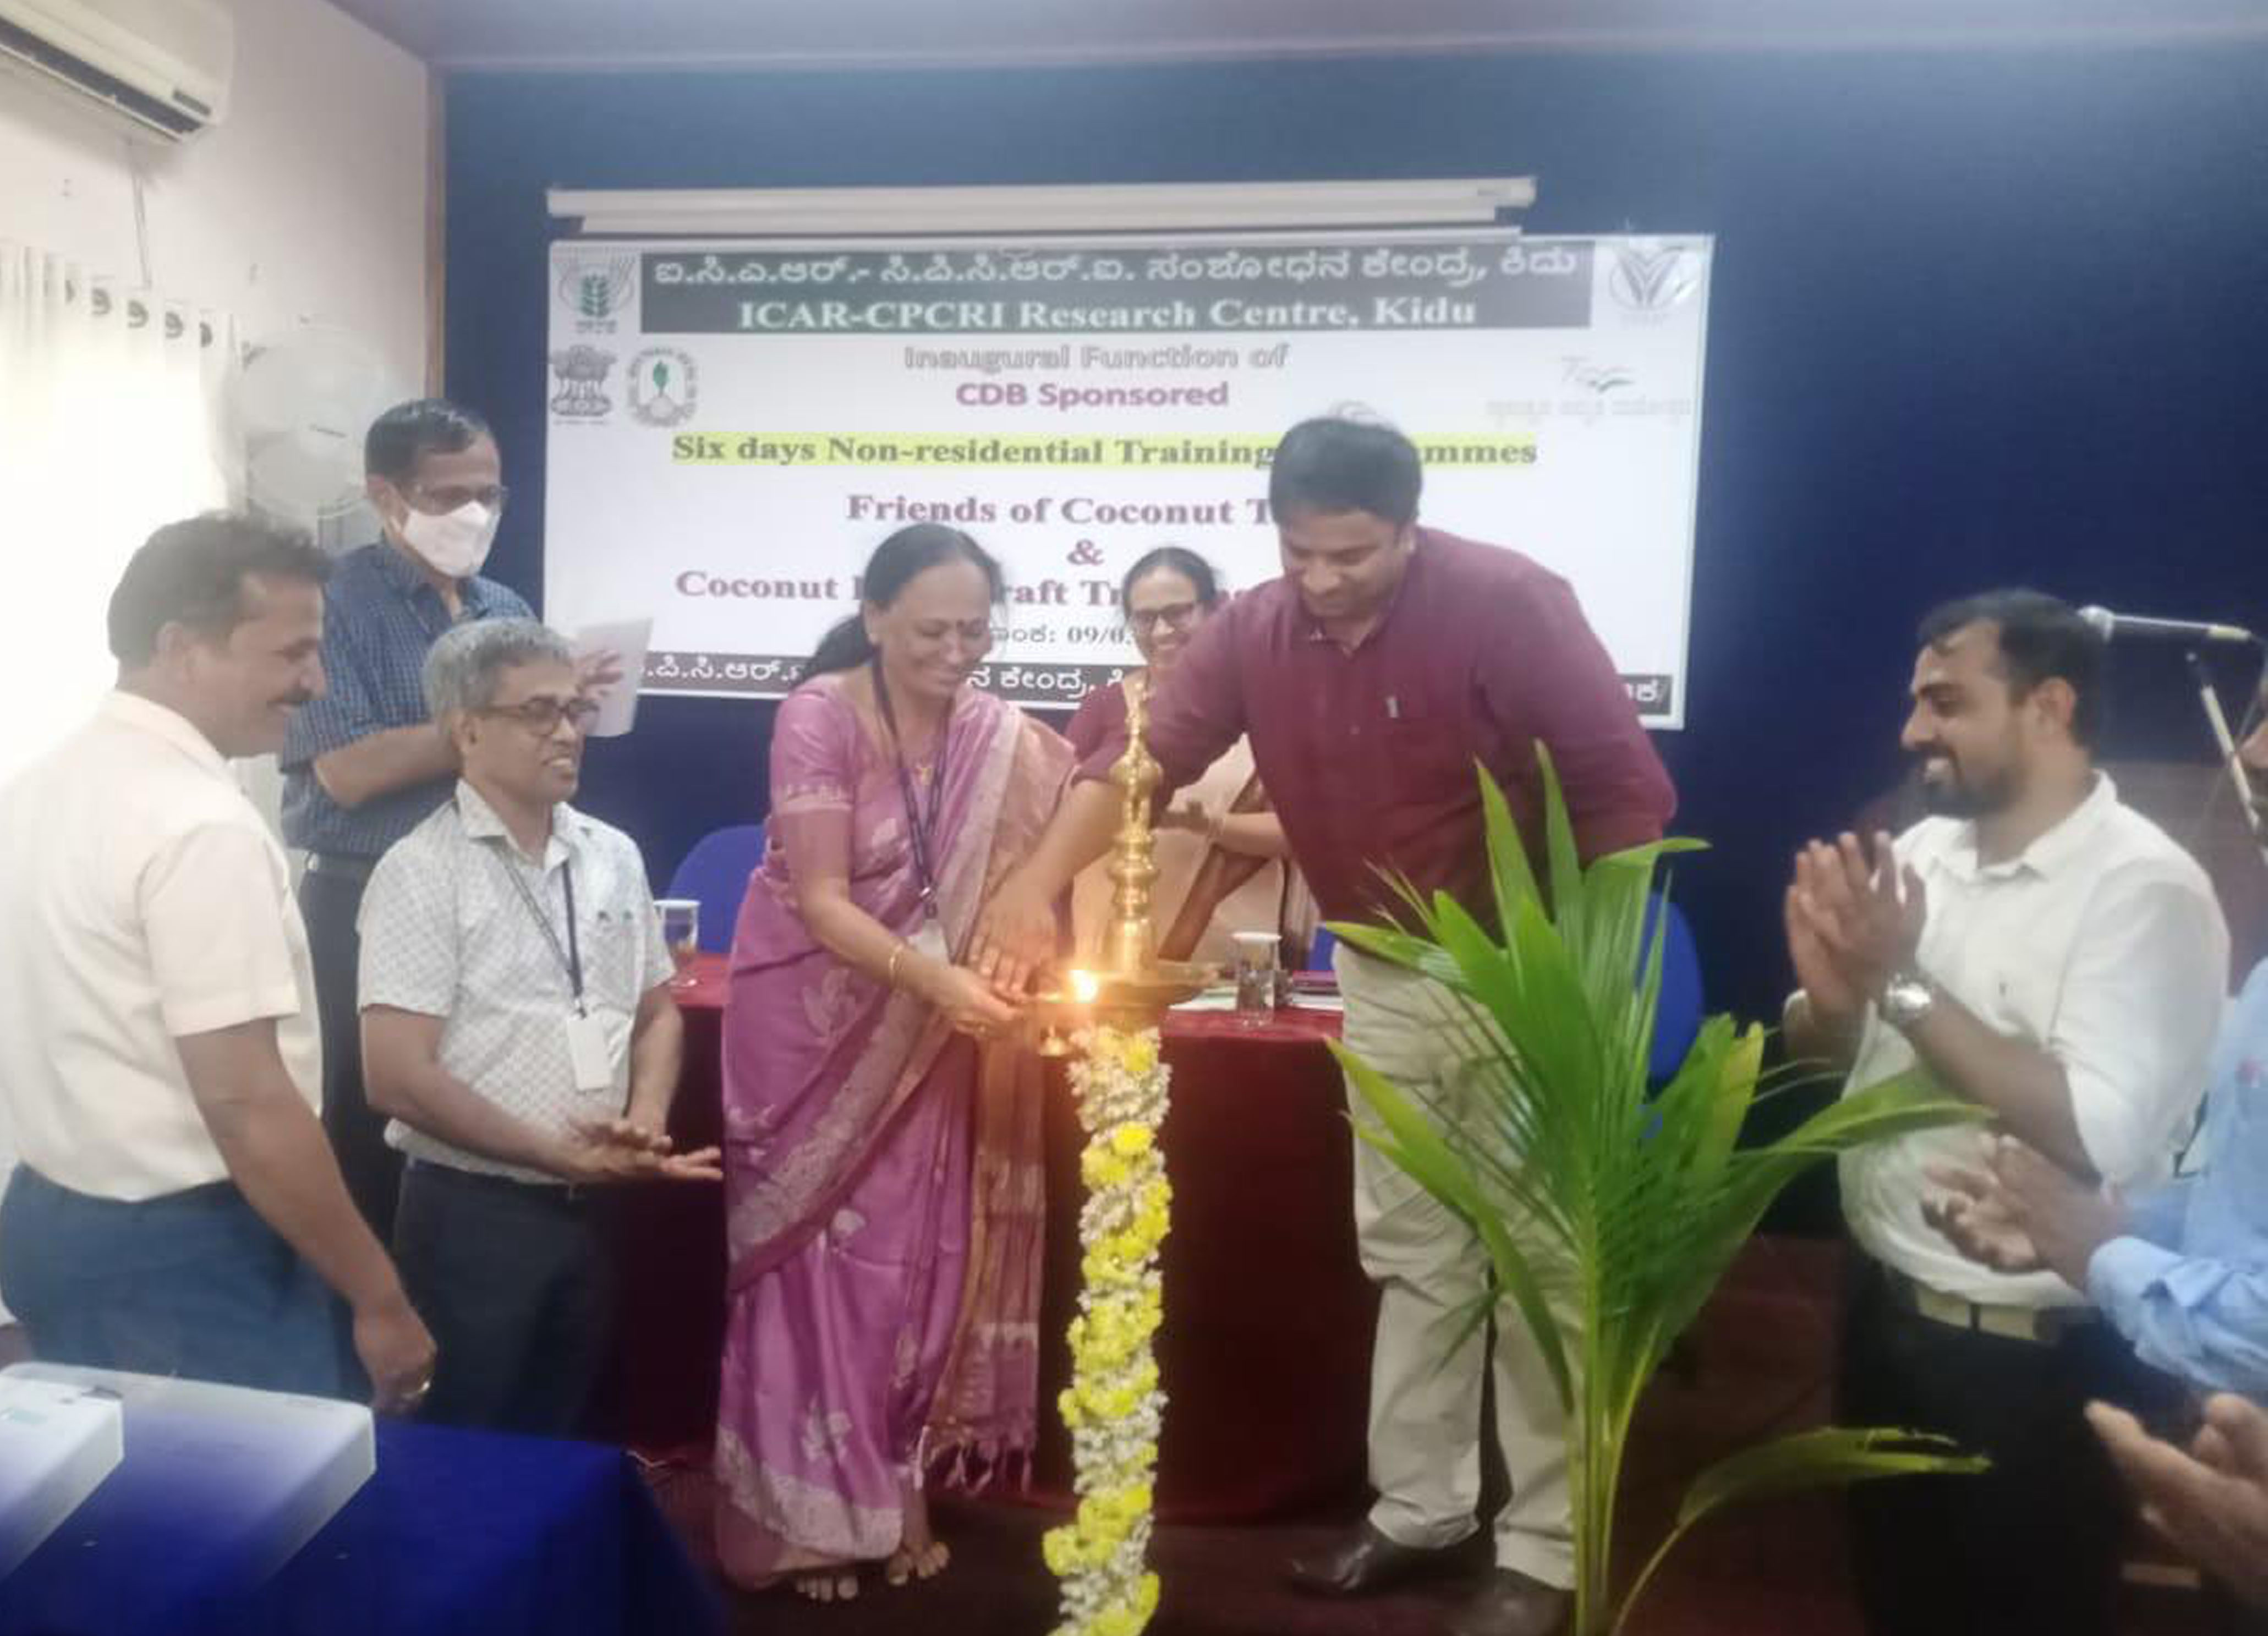 Photo for Inaugural function of Two Skill oriented training programmes in commemoration of golden jubilee celebration at ICAR-CPCRI Research Centre, Kidu